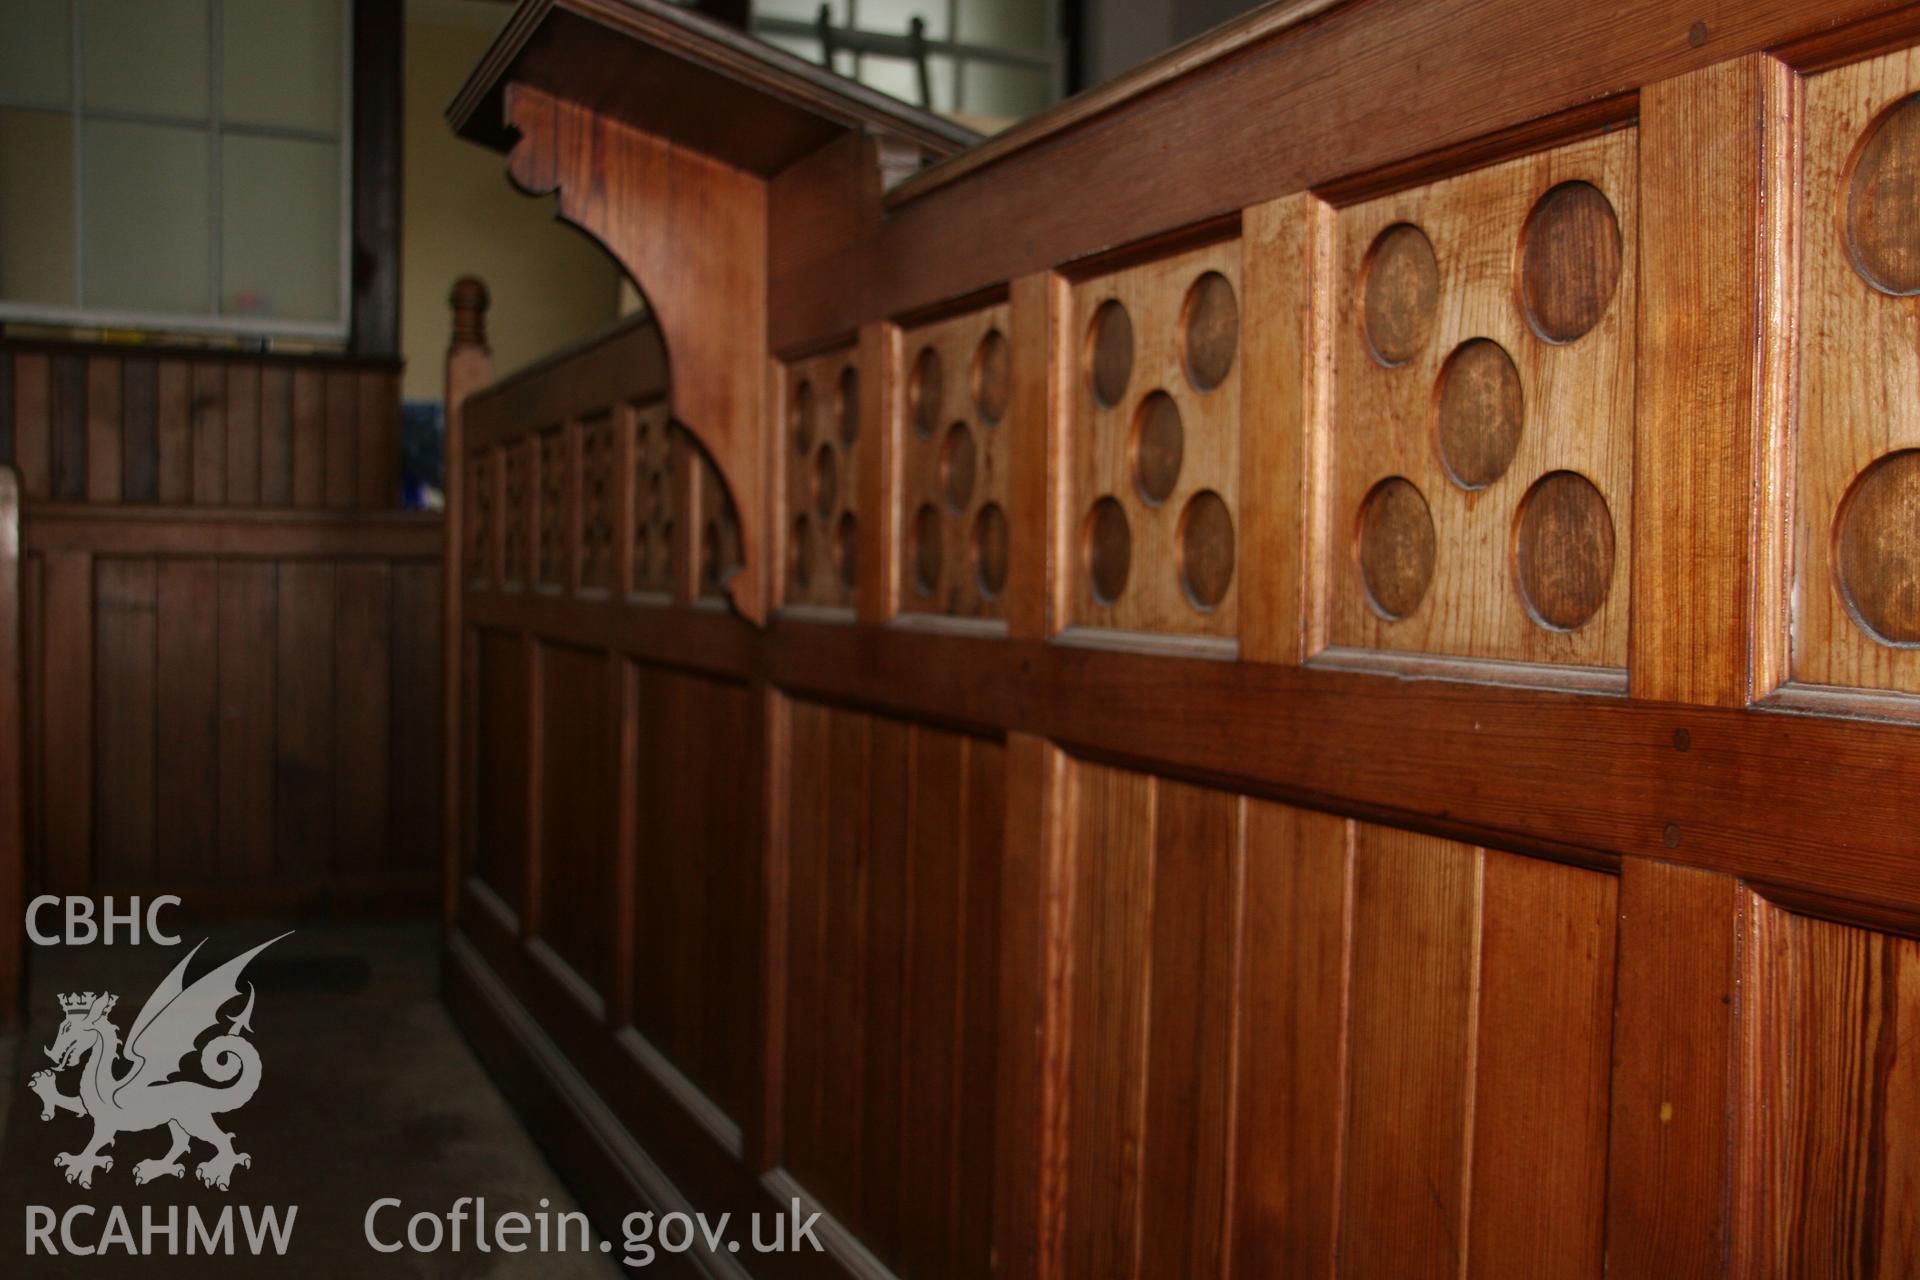 Photograph showing detailed view of wooden panelling at the former Llawrybettws Welsh Calvinistic Methodist chapel, Glanyrafon, Corwen. Produced by Tim Allen on 7th March 2019 to meet a condition attached to planning application.